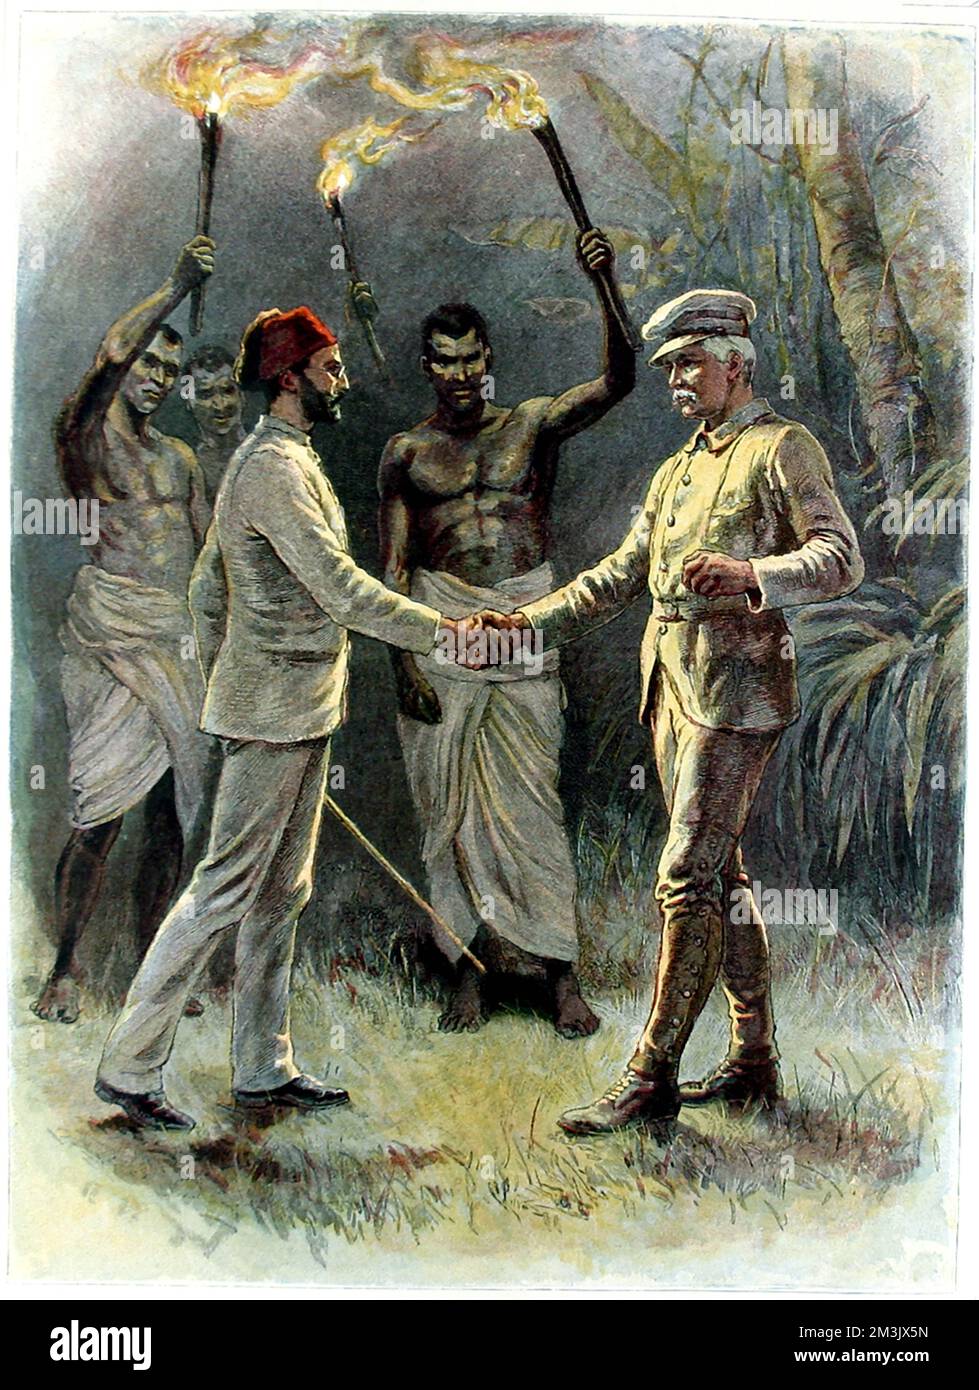 Emin Pasha (1840 - 1892) and Sir Henry Morton Stanley (1841 - 1904) at Kavalli, Central Africa, April 1888.   Emin Pasha, the German doctor, explorer, linguist and Governor of the Egyptian Equatorial Province had retreated to Wadelai, near Lake Albert, with 10,000 followers during the Mahdi Rising.  Cut off from all communication Emin Pasha was considered lost, so the British government sent out a rescue party led by Stanley. This image shows the scene as the two men meet for the first time. Stock Photo